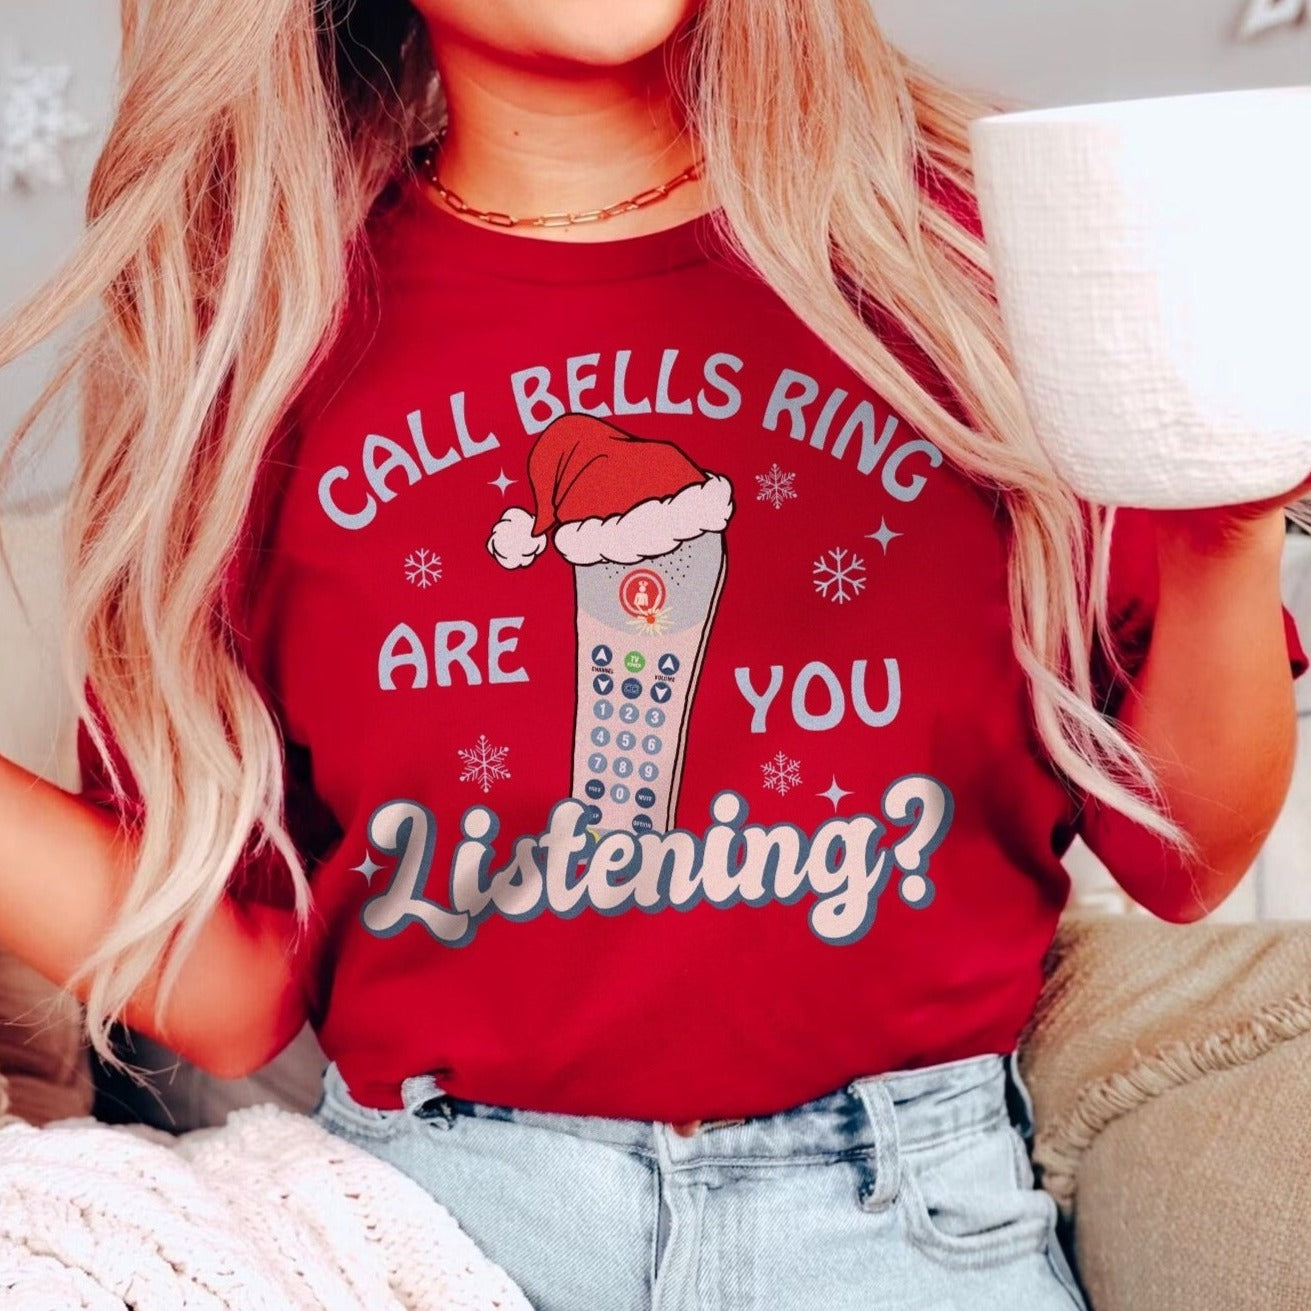 Call Bells Ring Are You Listening T-Shirt